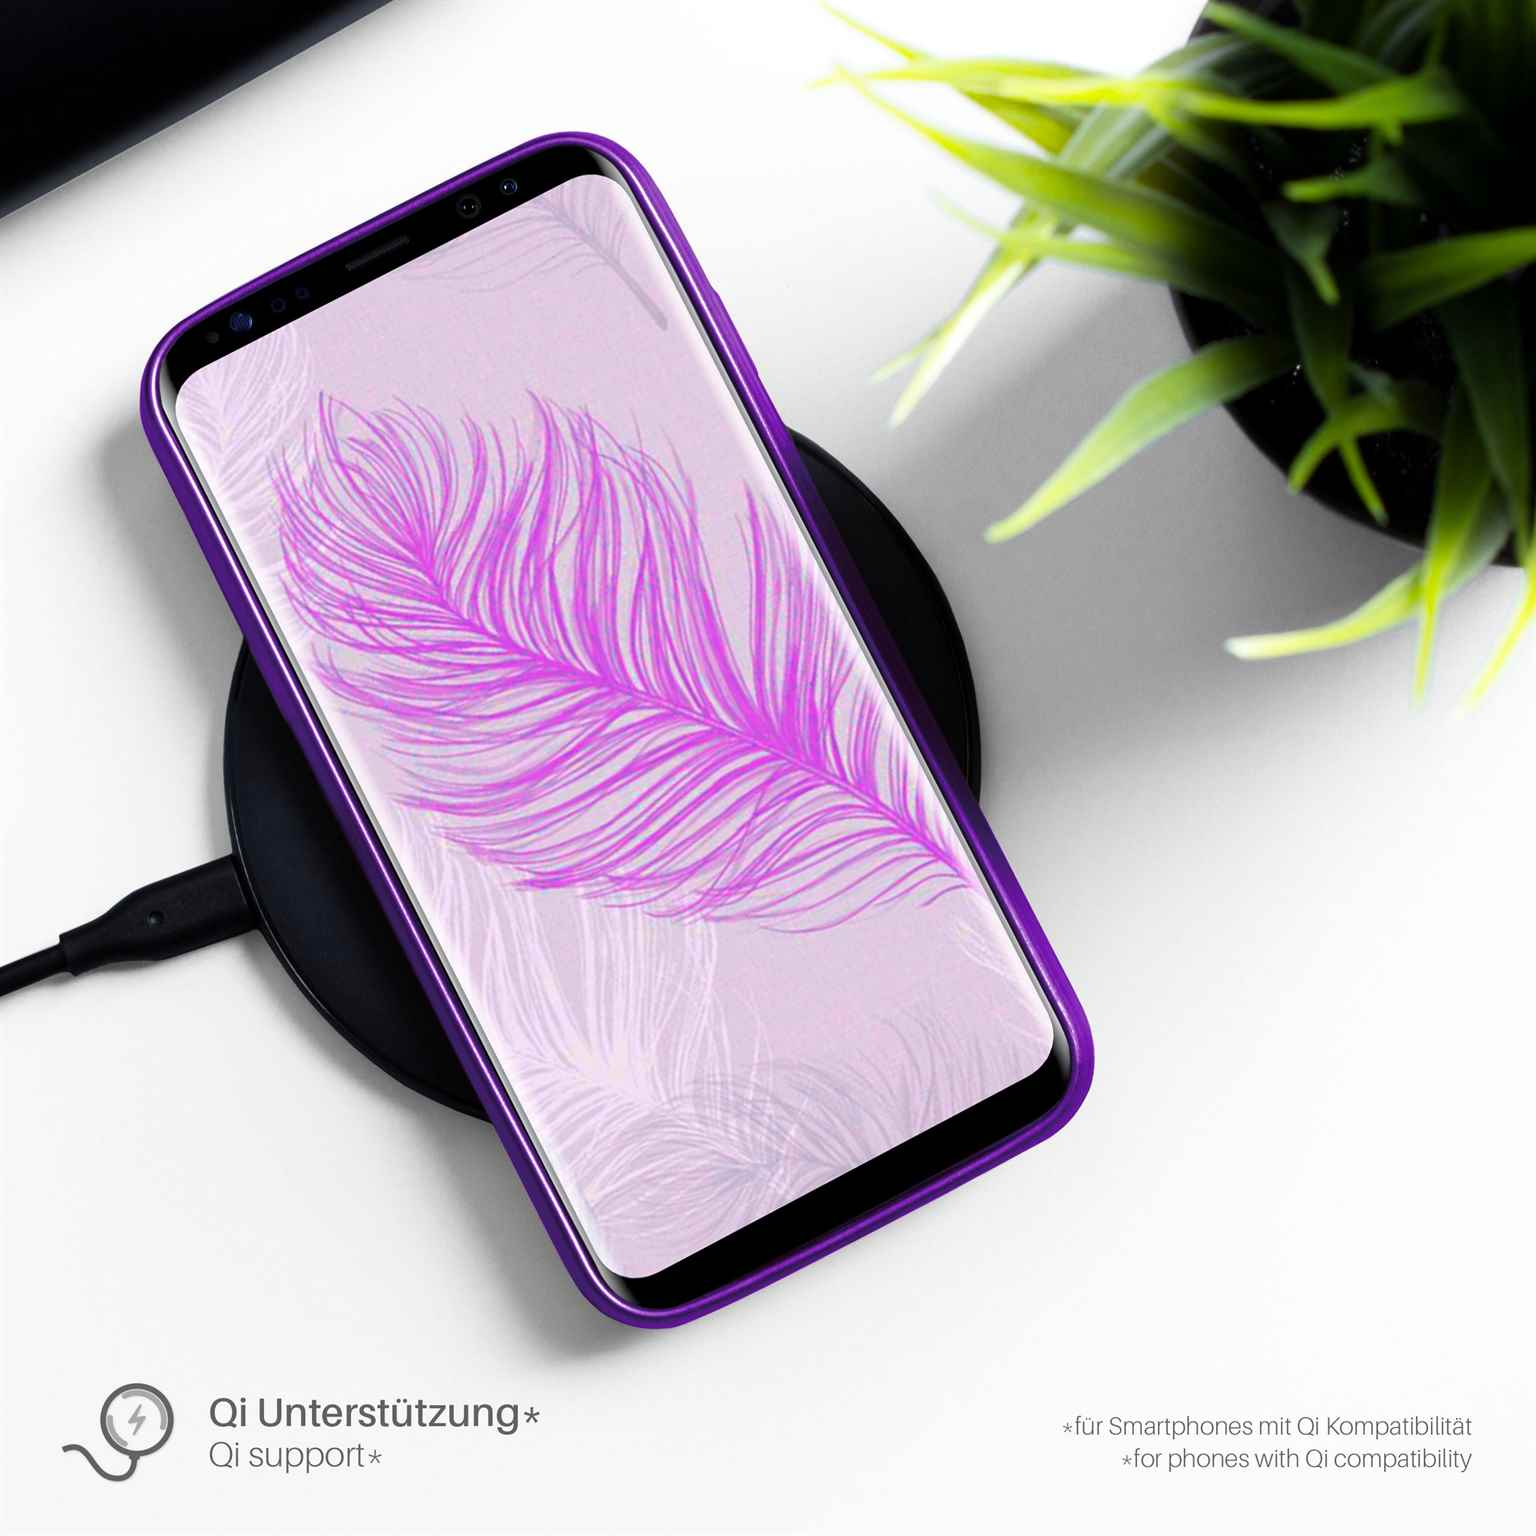 Purpure-Purple Case, 6s, Apple, iPhone MOEX Brushed Backcover,